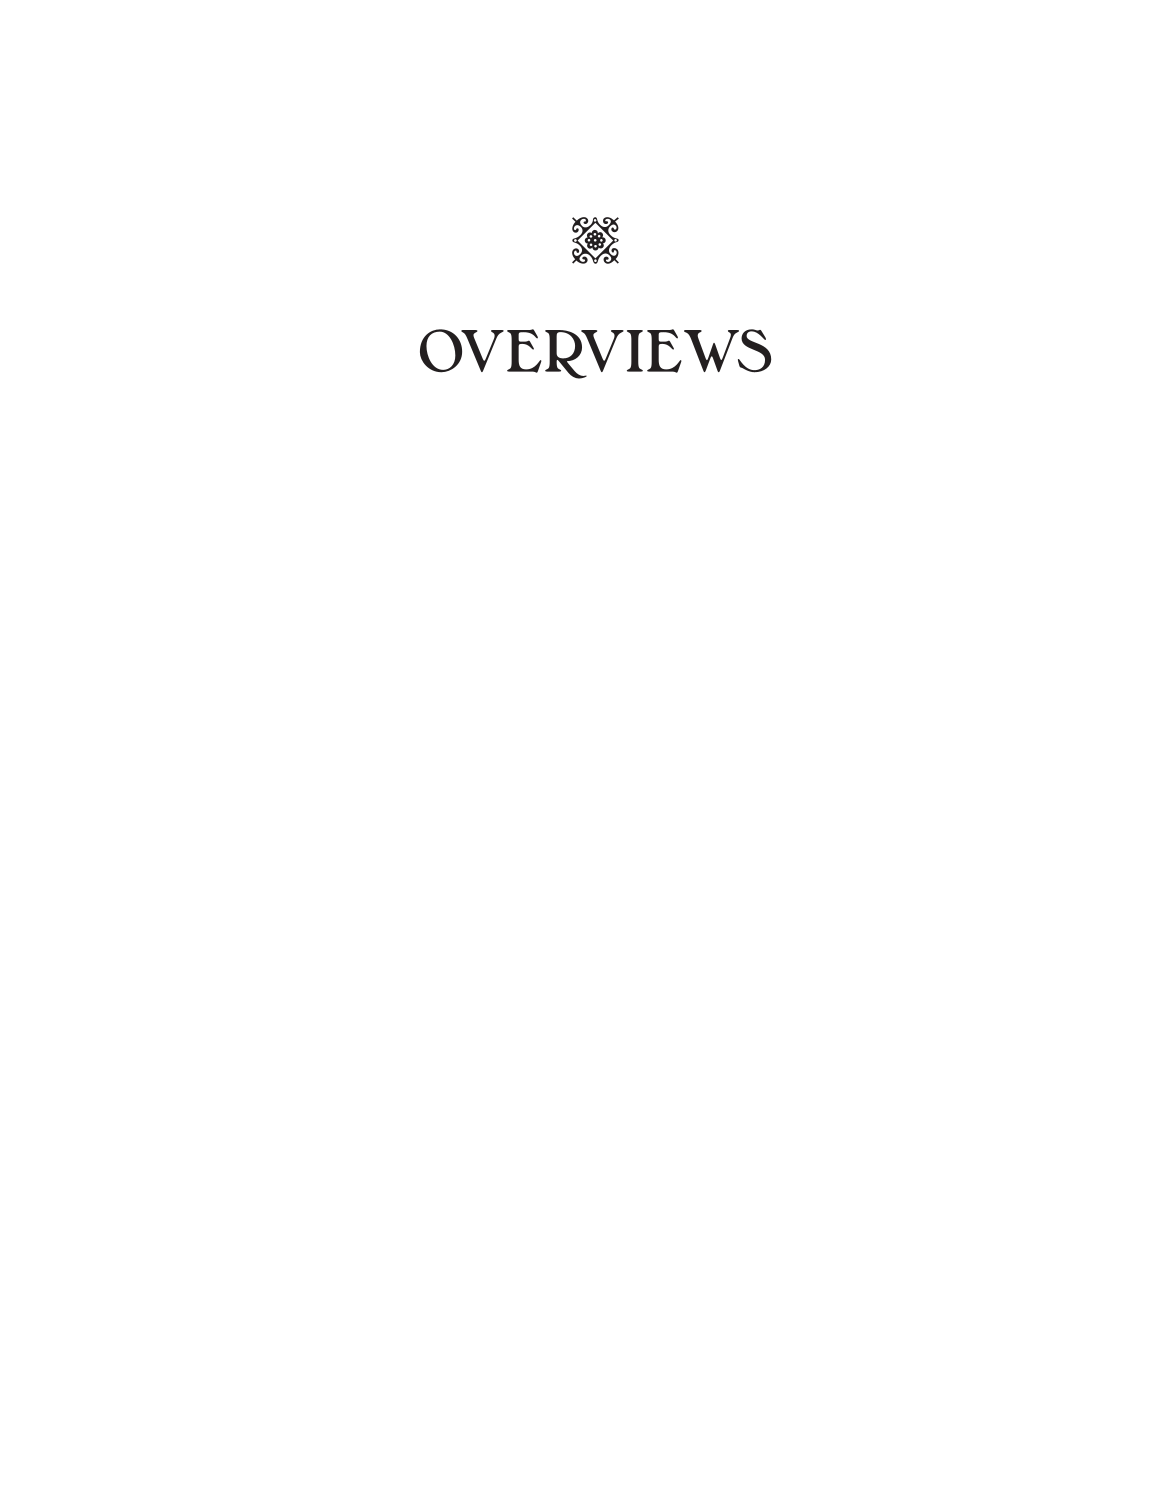 The Definitive Shakespeare Companion: Overviews, Documents, and Analysis [4 volumes] page 1